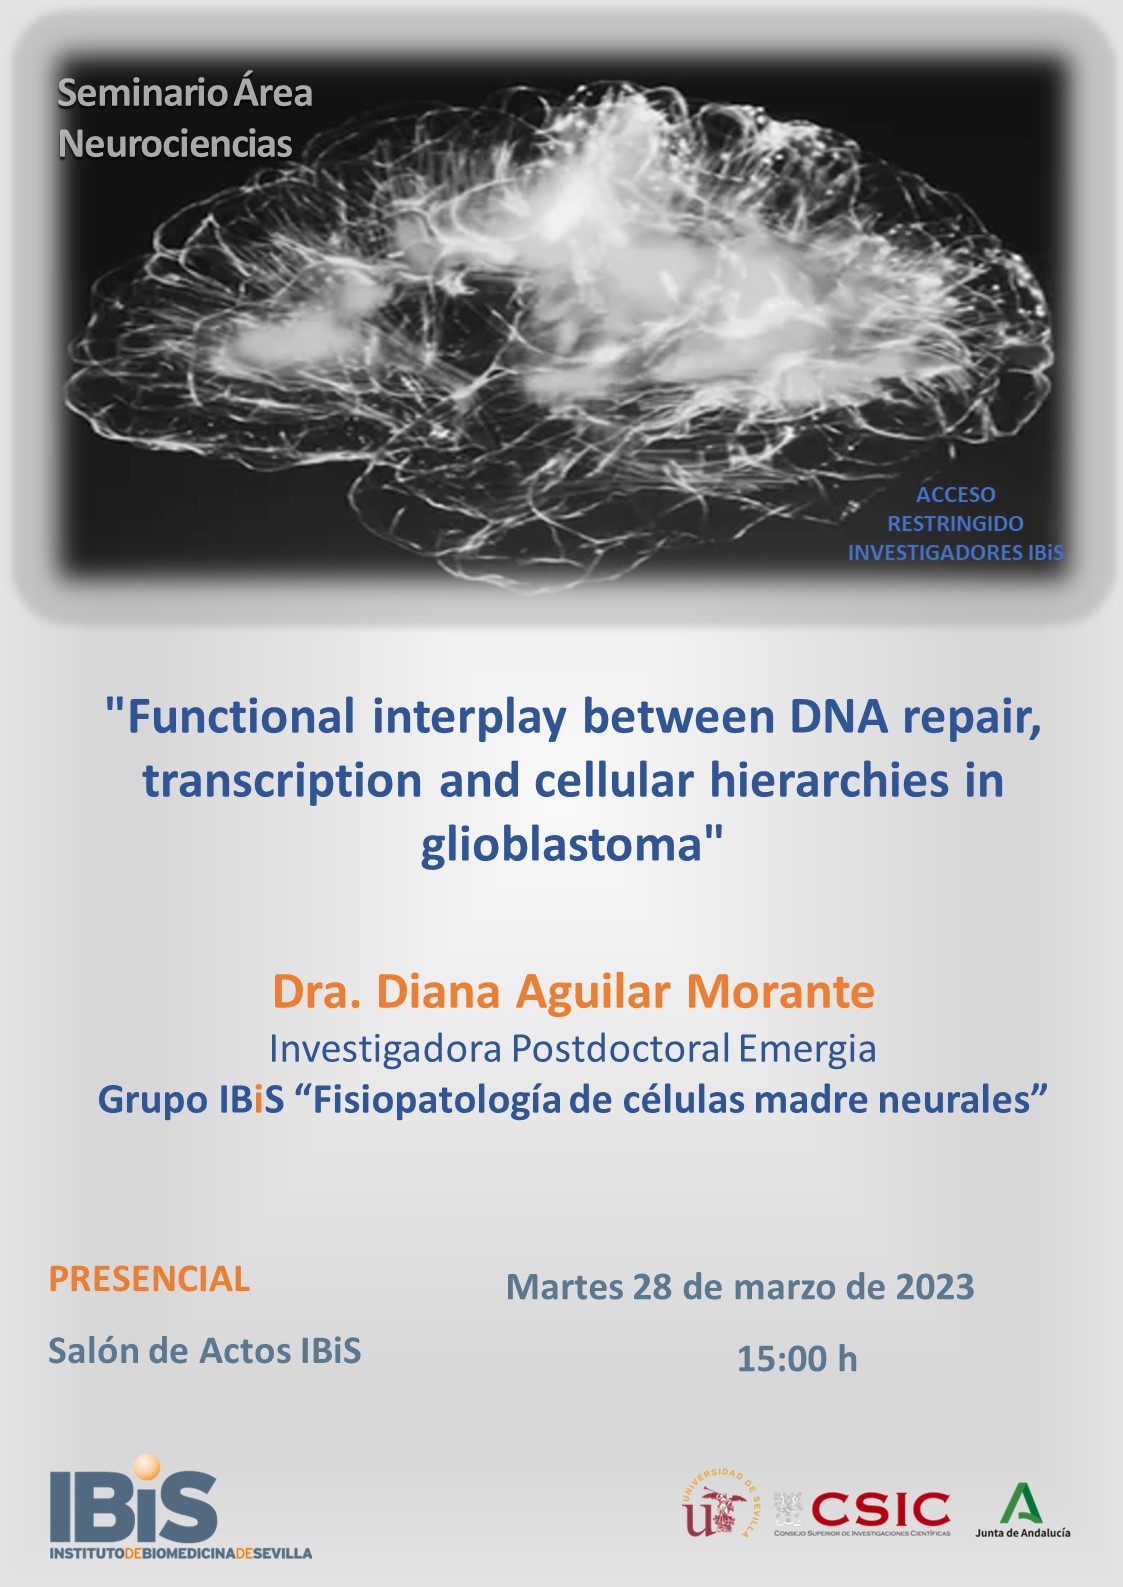 Poster: "Functional interplay between DNA repair, transcription and cellular hierarchies in glioblastoma"